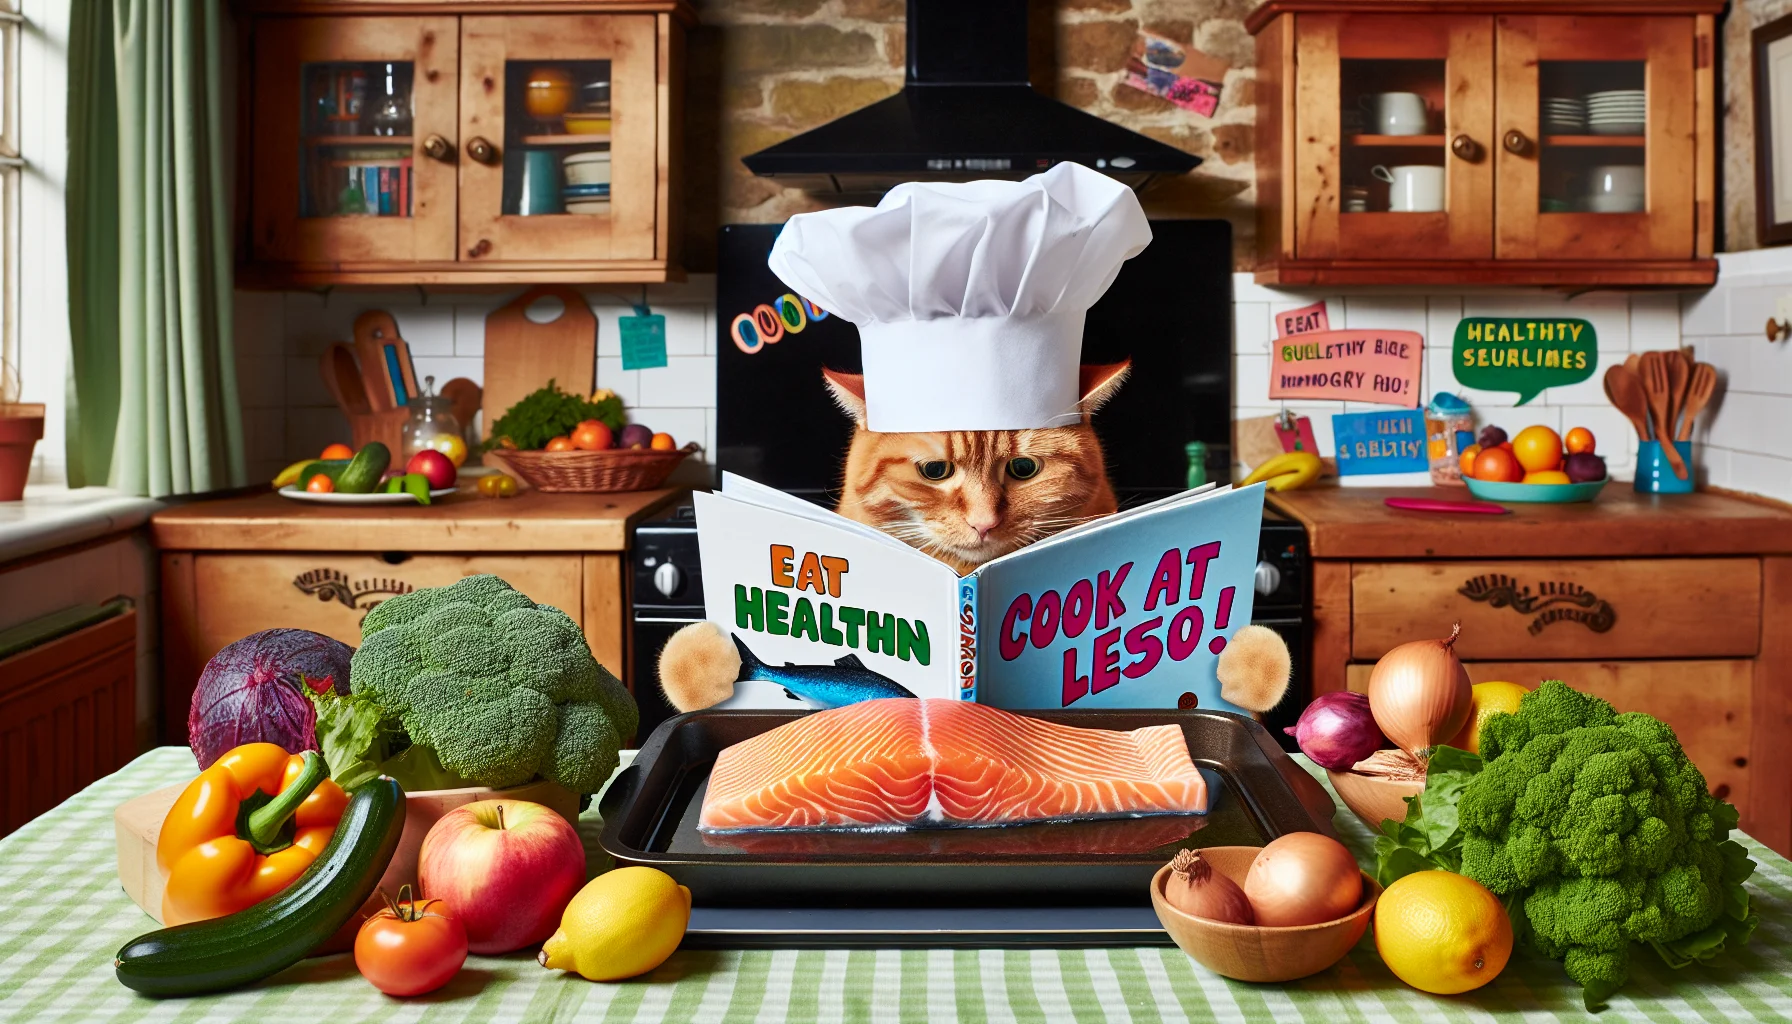 A humorous scene in a cozy home kitchen, where a mischievous orange tabby cat is attempting to cook a large, succulent fillet of salmon in an oven set at 350 degrees. The cat is wearing a white chef's hat and reading from a colorful cookbook with big, bold letters that say 'Salmon: Cook Time at 350!' On the oak dining table nearby, there is a bright, attention-grabbing sign that reads 'Eat Healthy for Less!' surrounded by an abundance of budget-friendly fruits and vegetables. The image encourages a practical and cost-effective approach to maintaining a healthy diet.